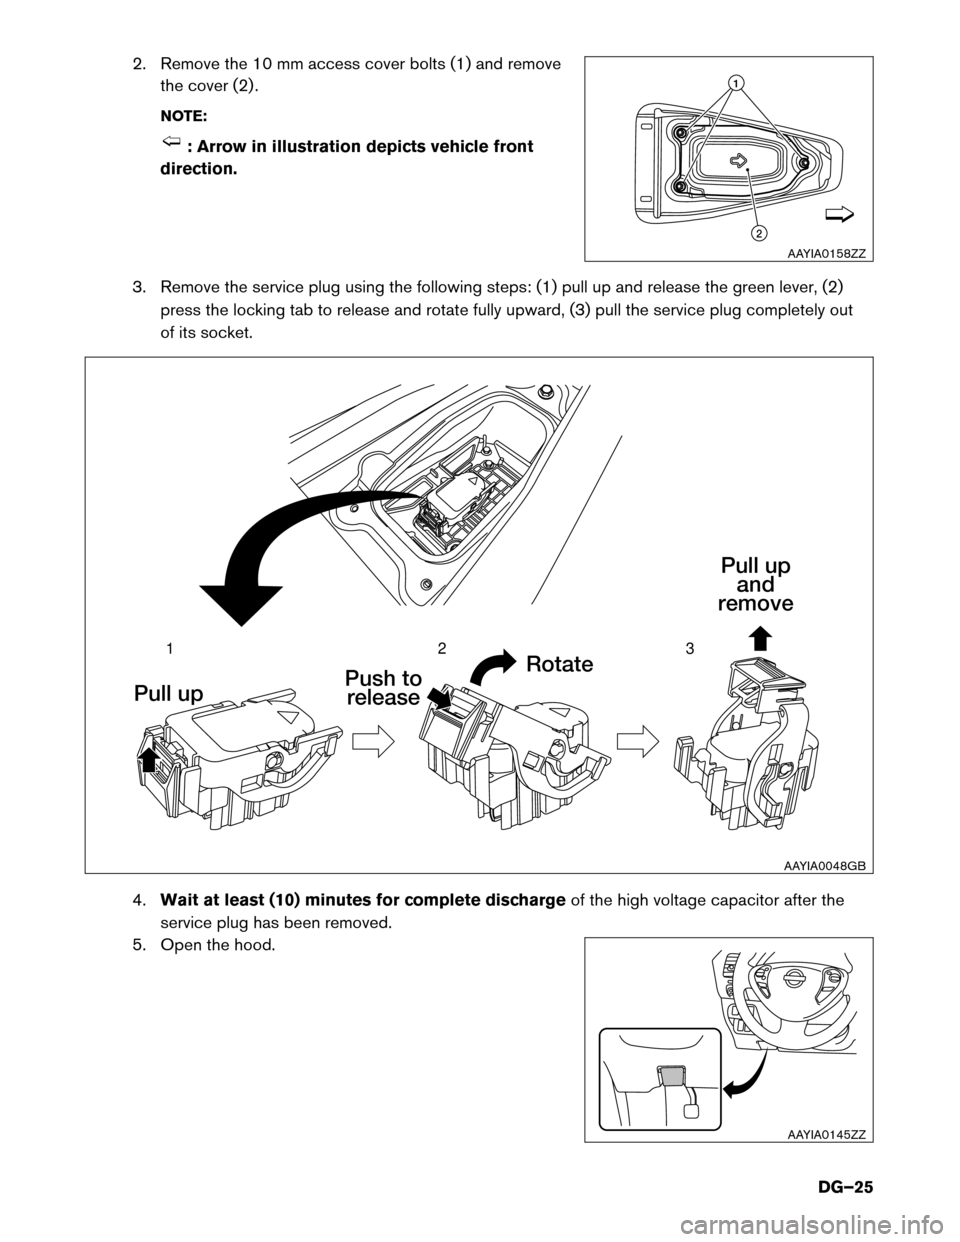 NISSAN LEAF 2016 1.G Dismantling Guide 2. Remove the 10 mm access cover bolts (1) and remove
the cover (2) .
NOTE: : Arrow in illustration depicts vehicle front
direction.
3.

Remove the service plug using the following steps: (1) pull up 